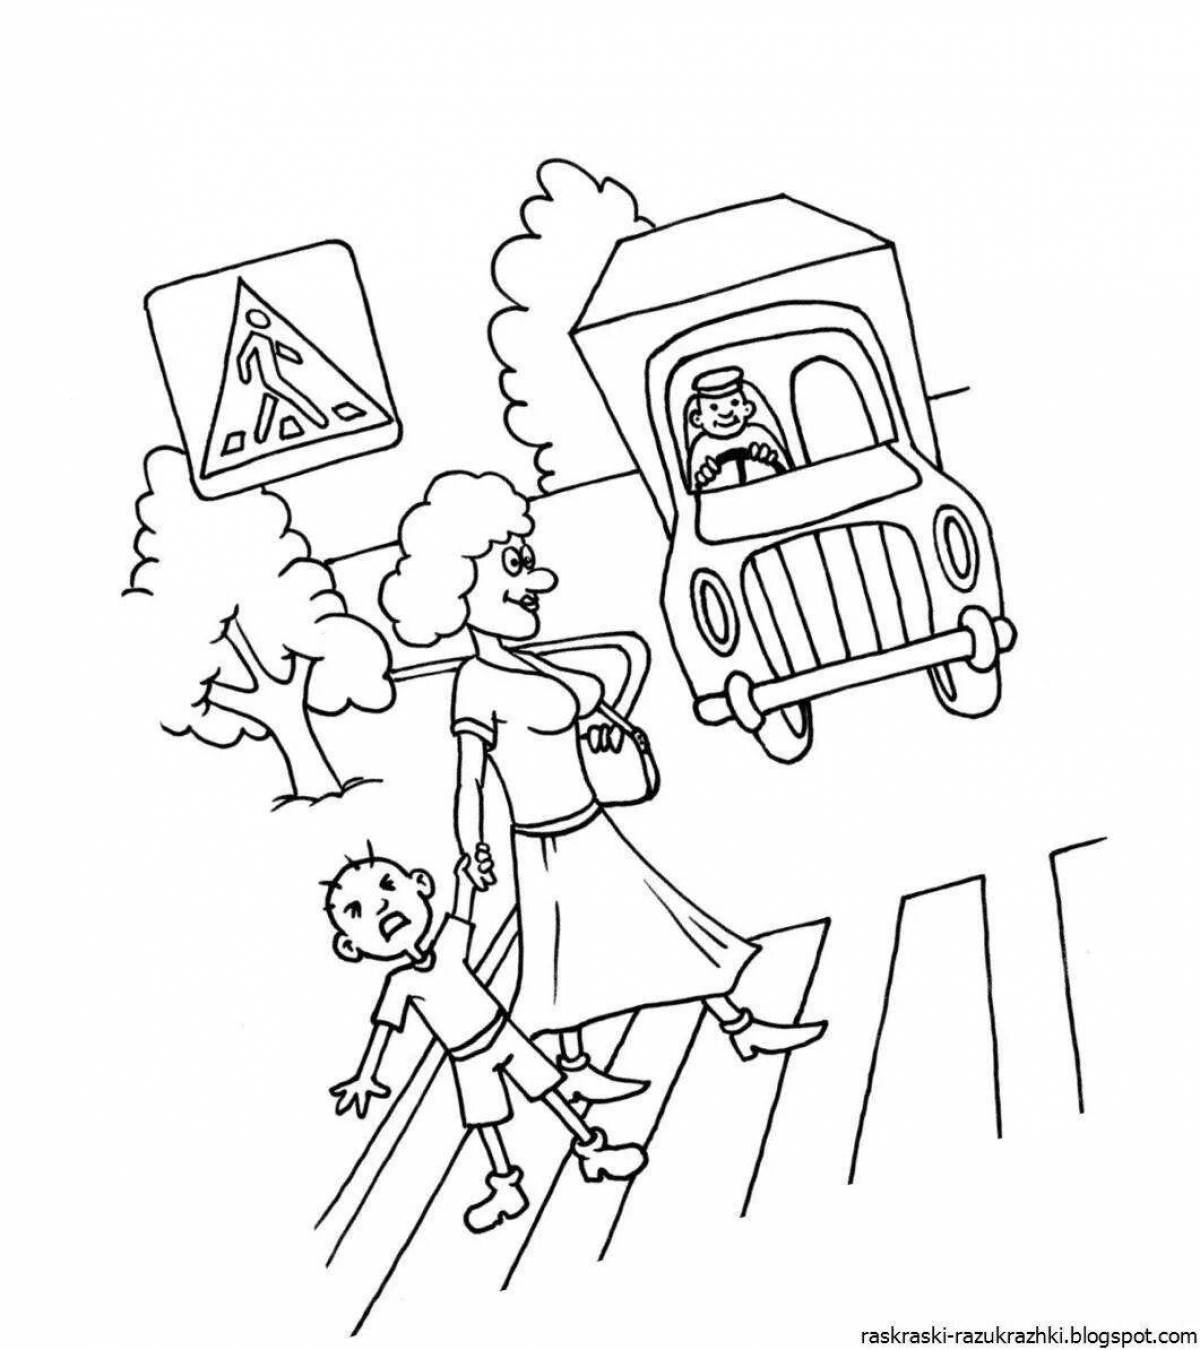 A fun road safety coloring page for little ones